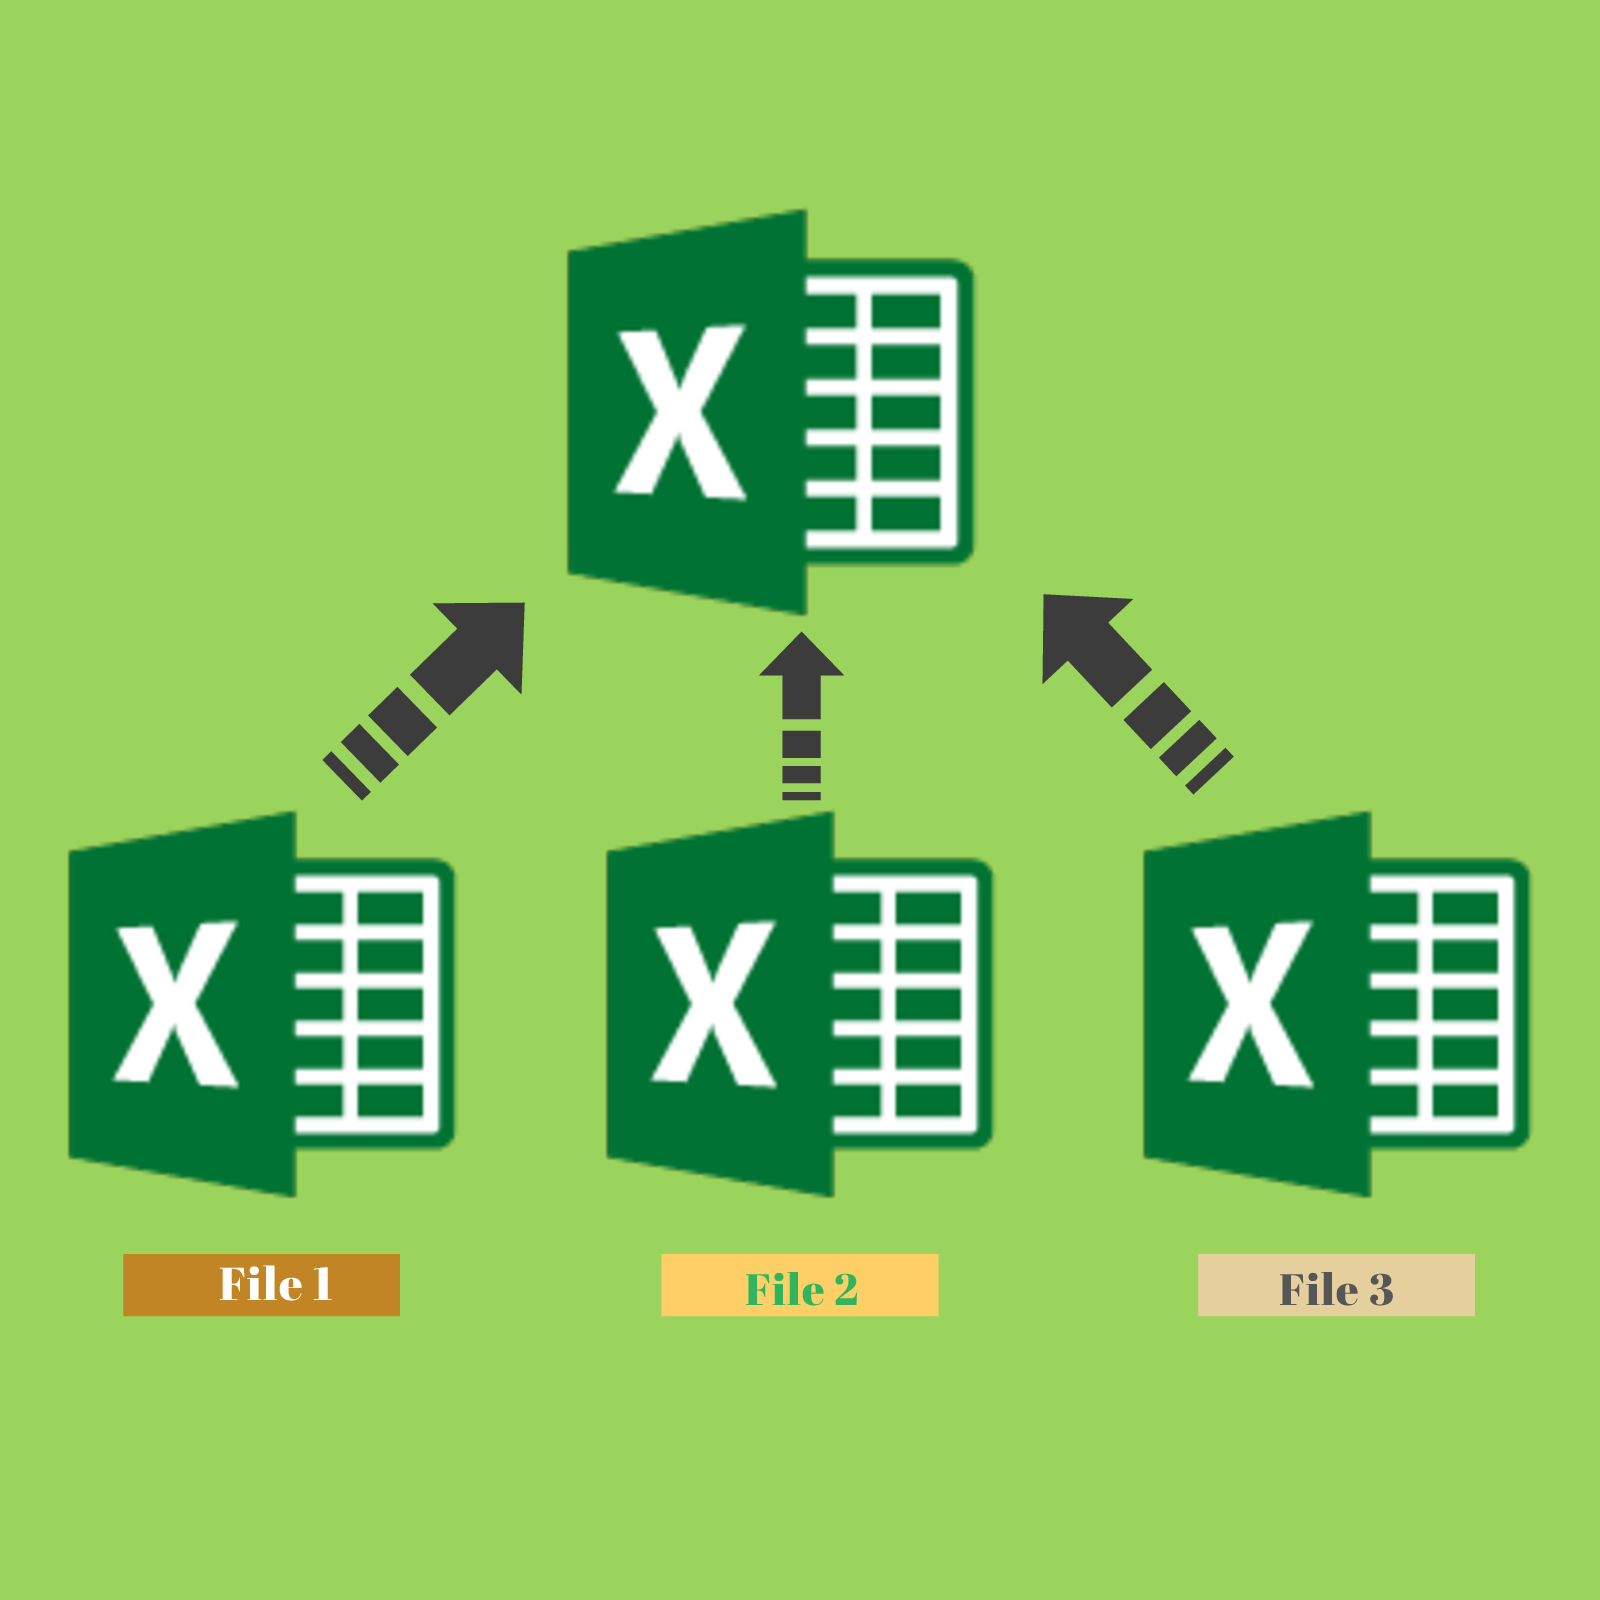 combine-multiple-workbooks-into-one-featured-image-excel-junction